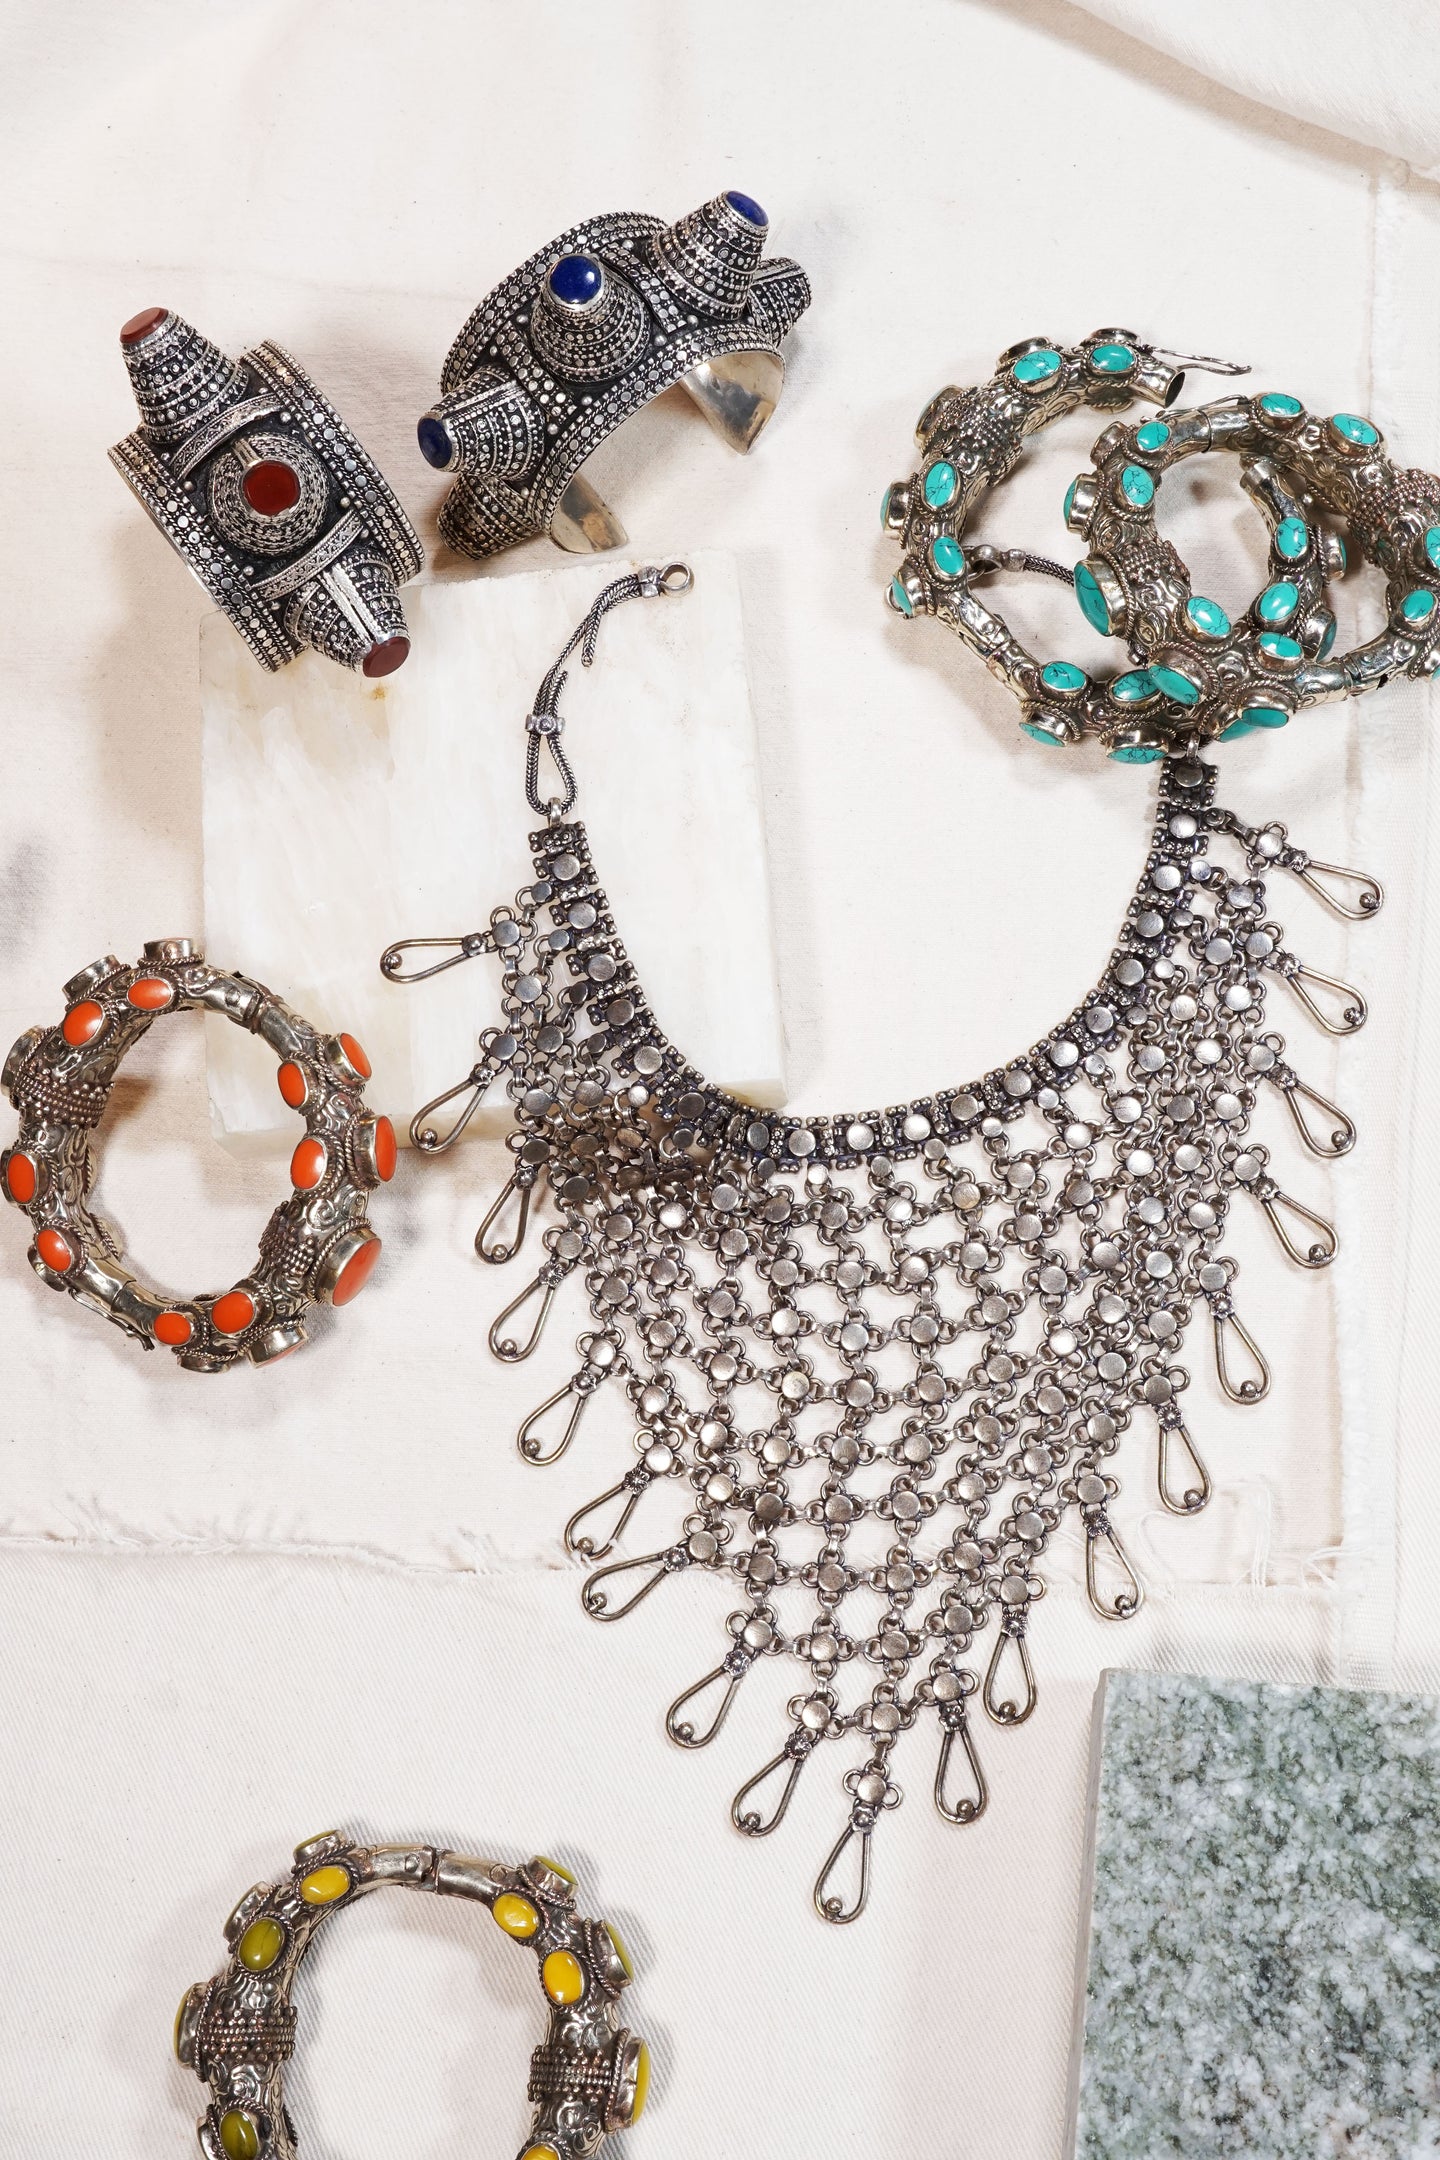  Soul Statement Vintage Country Western Jewelry for Women: Boho  Turquoise & Bronze Patina with Long Copper Tassel Chains